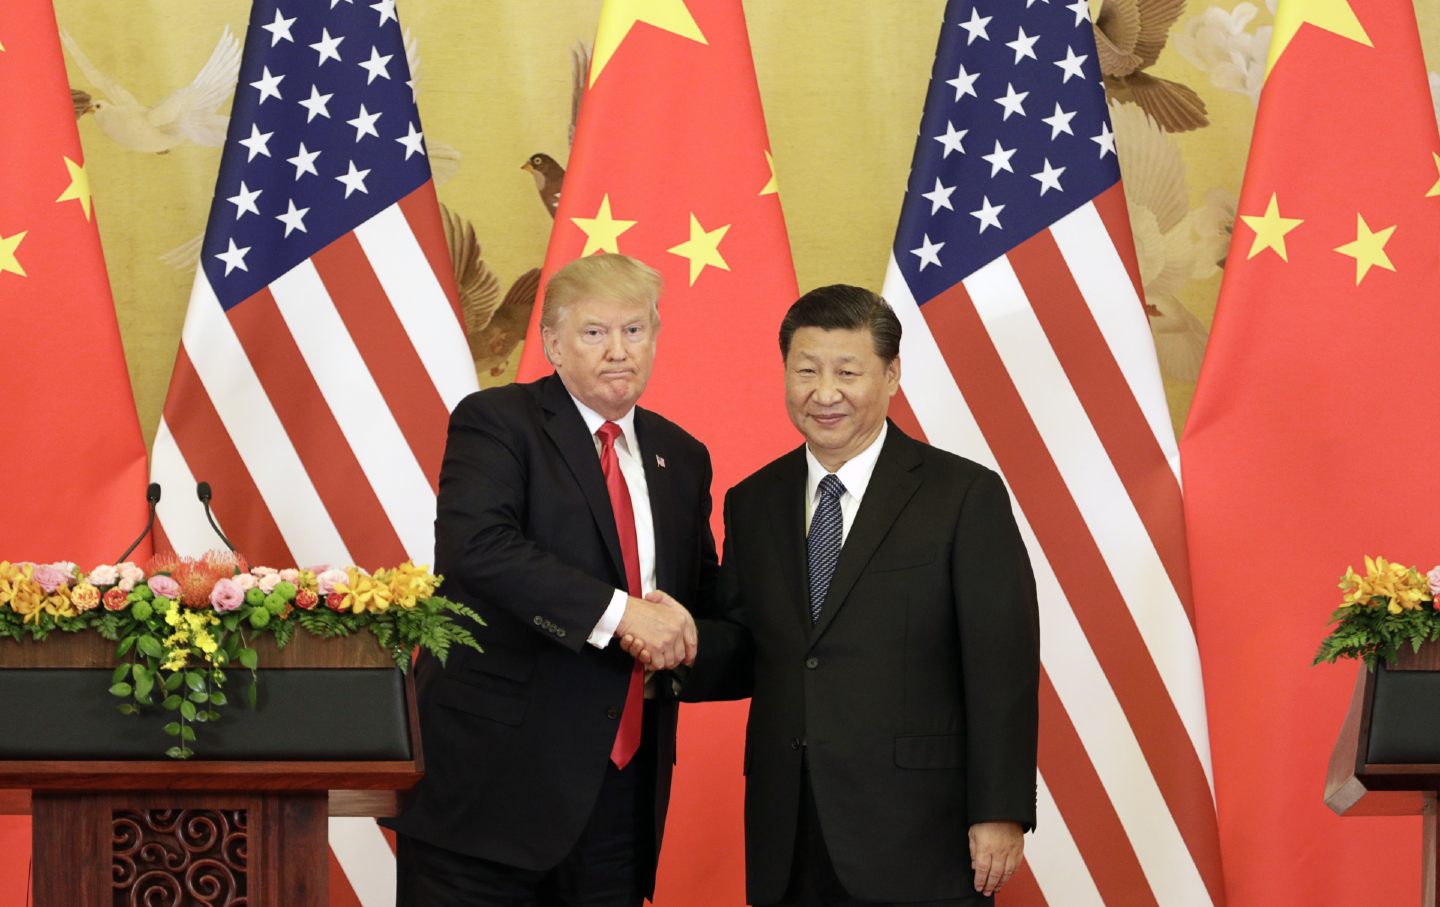 Donald Trump and Chinese President Xi Jinping in 2017. Project 2025 commits the US to a state of permanent belligerence against China.